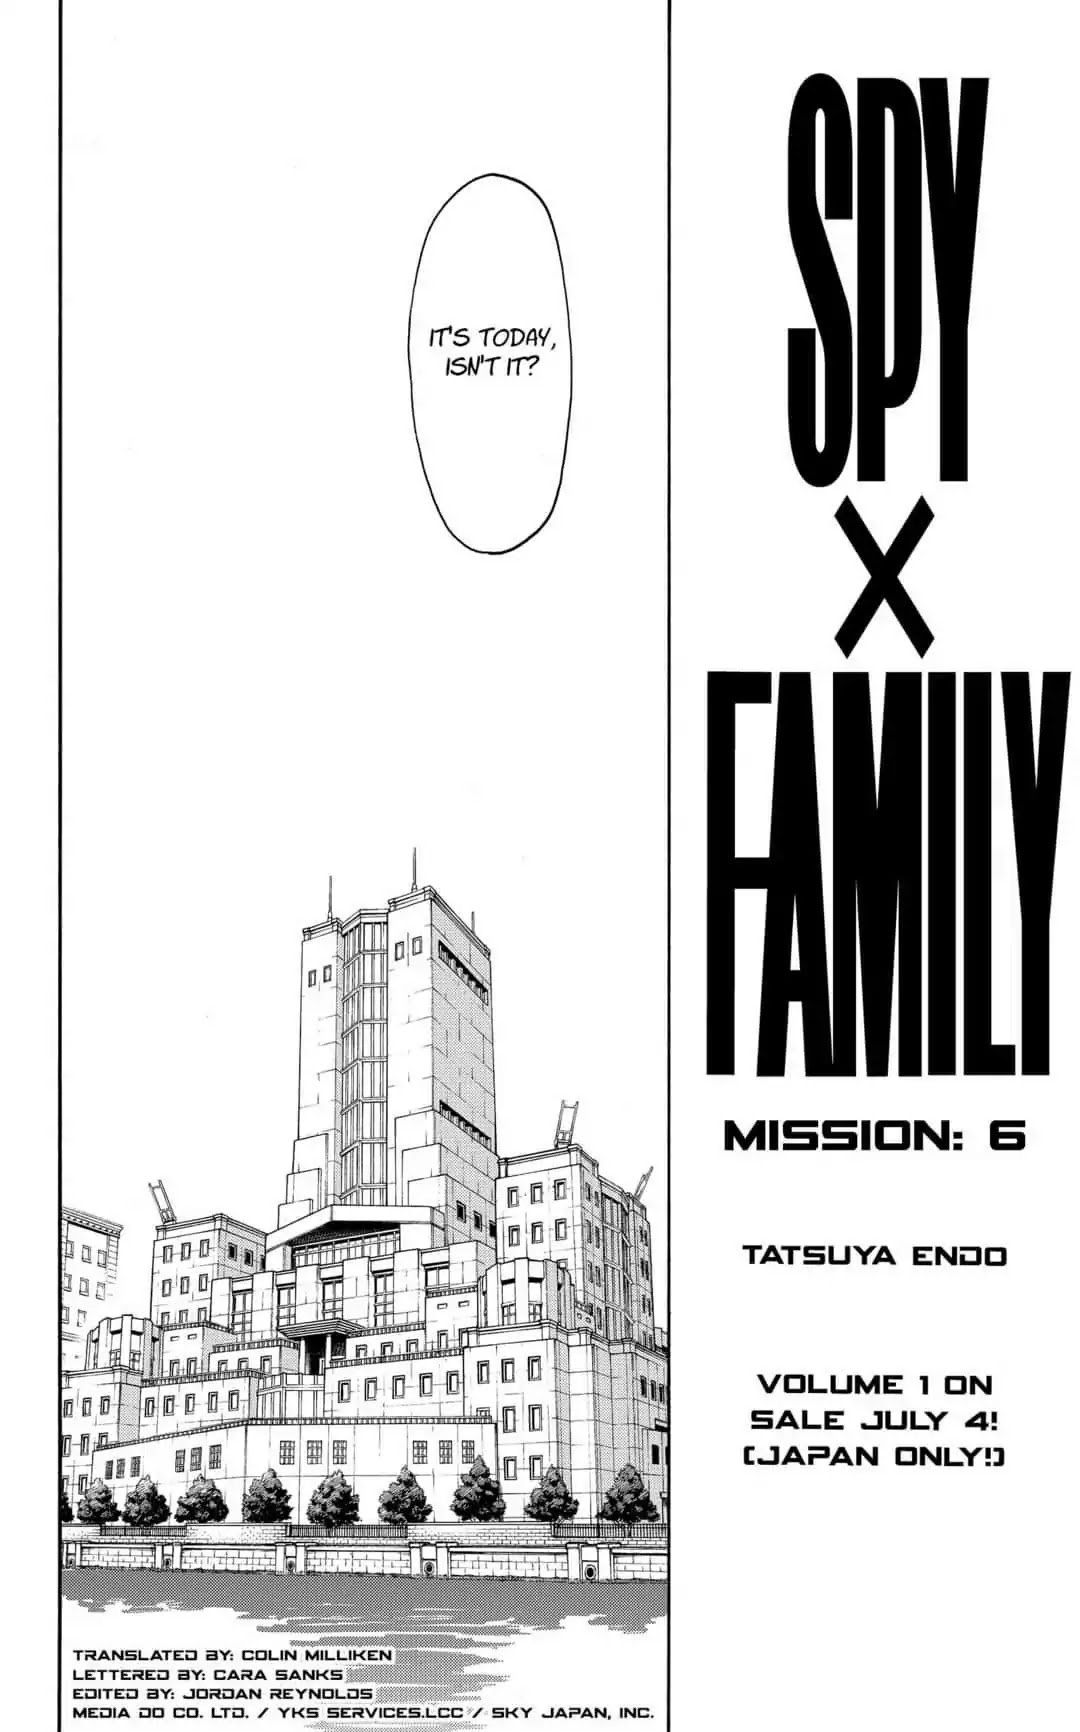 Spy x Family, spy x family anime announcement, spy x family wiki, read spy x family, read spy x family manga, spy x family manga, spy x family manga online, read spy x family online, spy x family characters, spy x family chapters and volumes, how many volumes of spy x family are there, spy x family viz, spy x family anime news, spy x family amazon, spy x family novel, is spy x family good, the spy x family, spy x family anime studio, spy x family anime adaptation, spy x family author, spy x family age appropriate, spy x family art, spy x family anime release schedule, spy x family box set, spy x family books, spy x family book 4, spy x family book 2, spy x family book 1, spy x family books a million, spy x family book 5, spy x family book 6, spy x family bundle, spy x family booktopia, spy x family cover, spy x family dog, spy x family damien, spy x family do they find out, spy x family discussion, spy x family daybreak, spy x family description, spy x family domain, spy x family digital, spy x family dj, spy x family donovan desmond, spy x family ebook, spy x family episodes